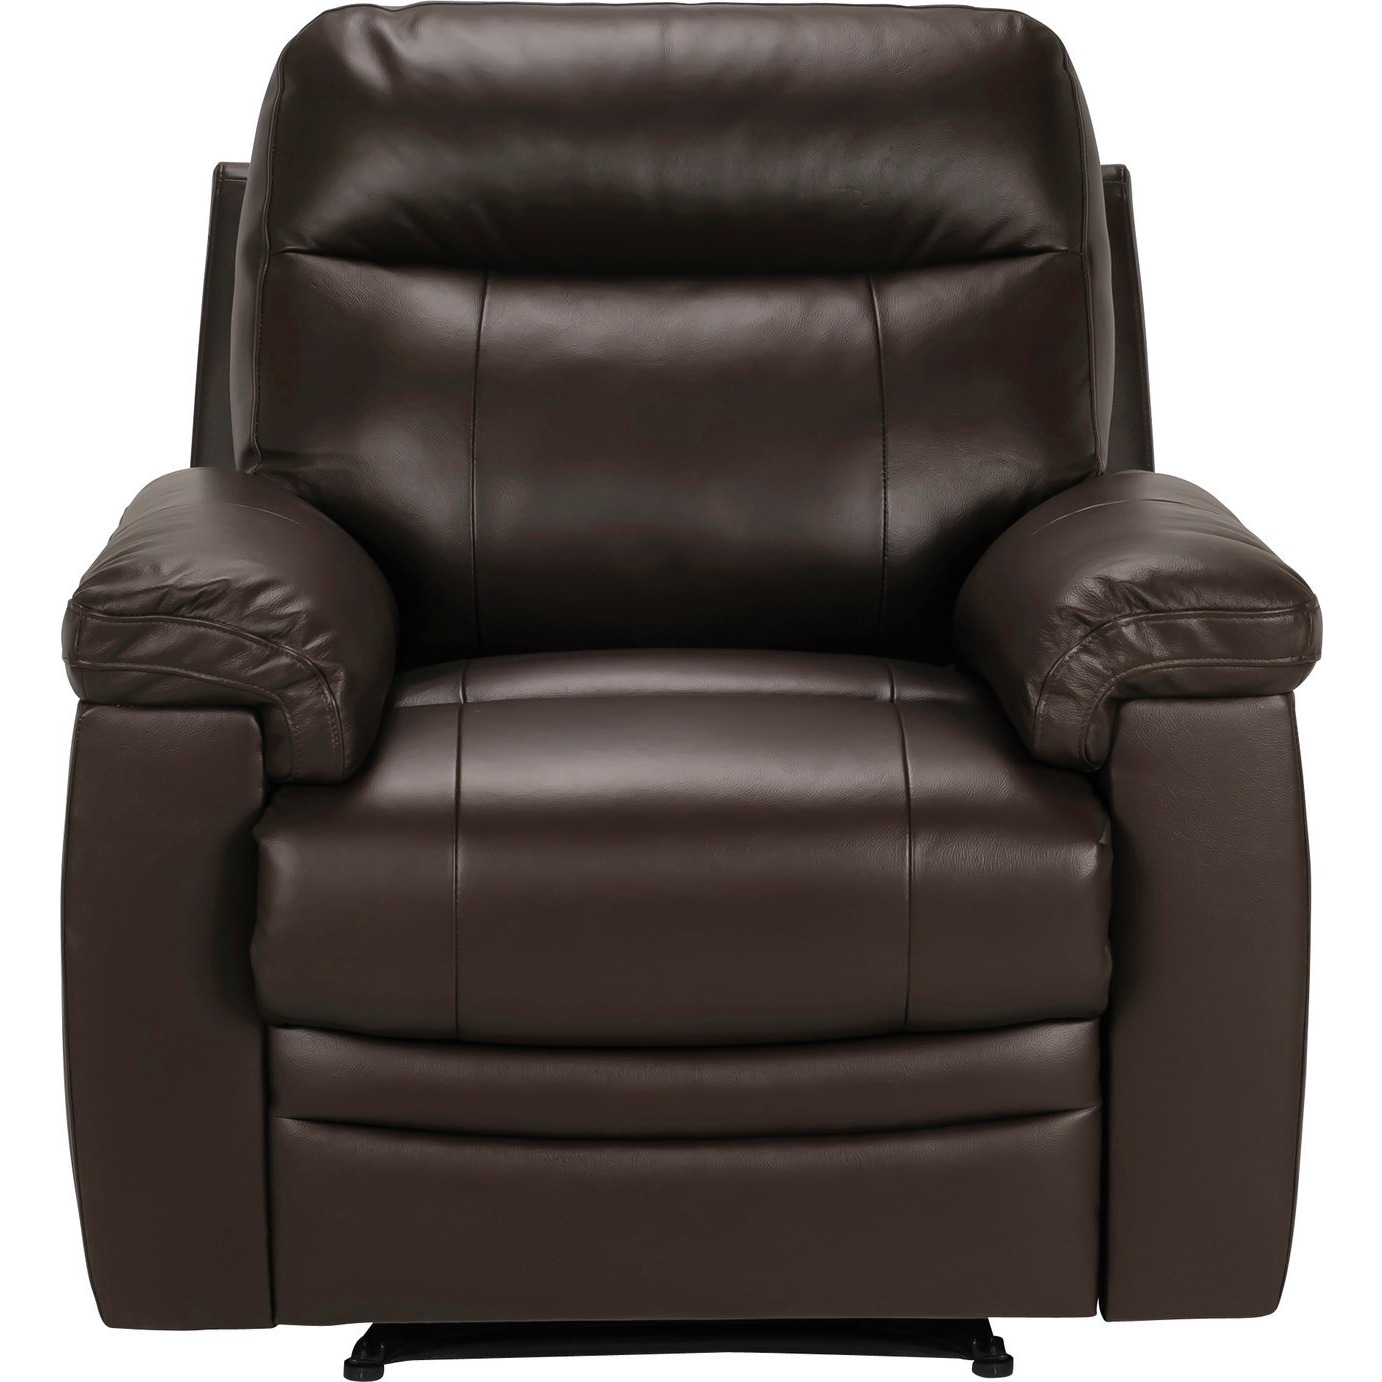 Argos Home Paolo Leather Mix Manual Recliner Chair - Brown - image 1